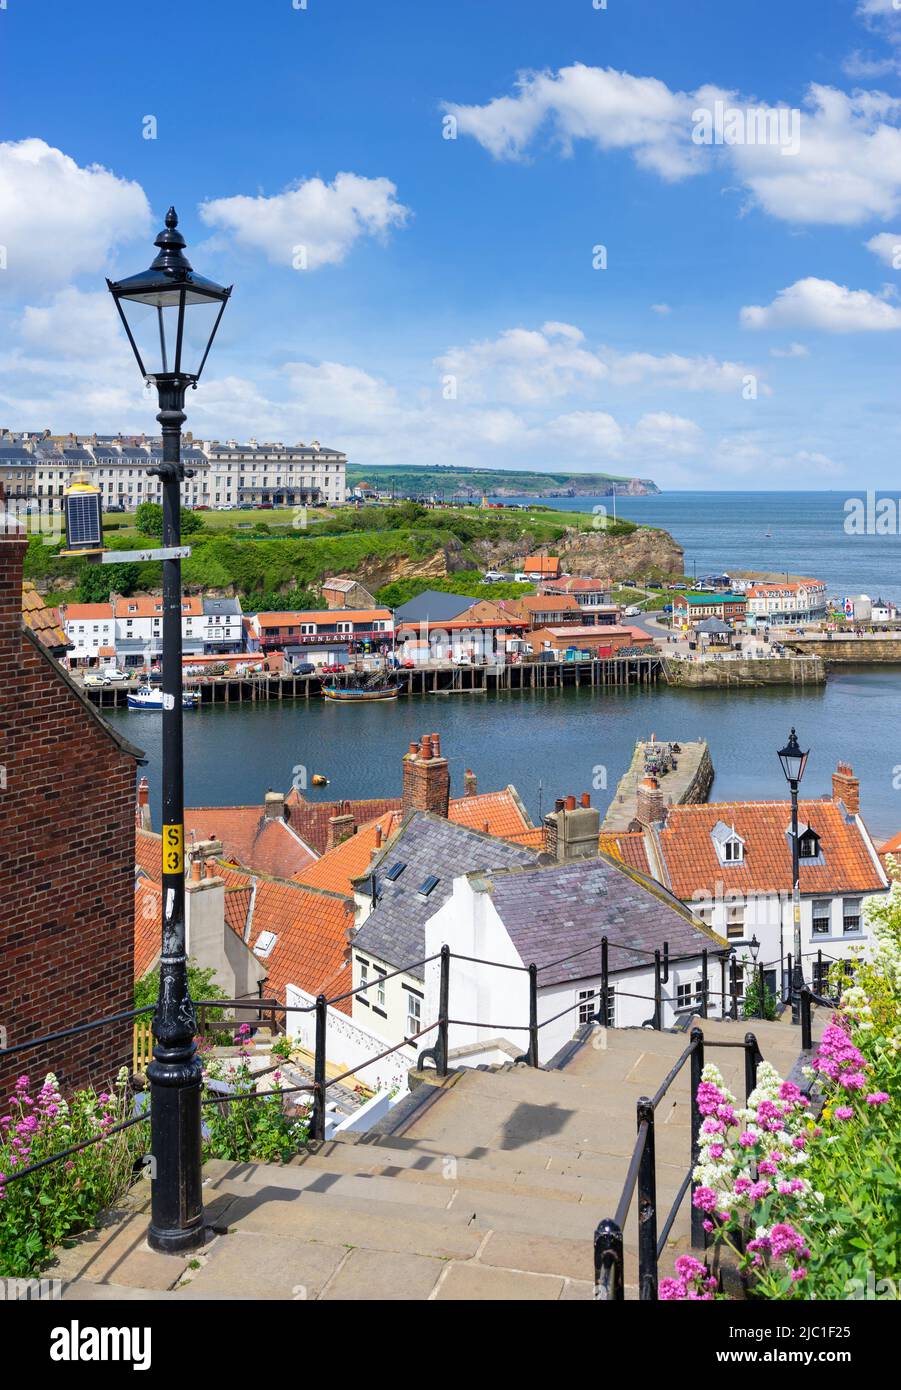 Whitby Yorkshire Whitby 199 marches Whitby North Yorkshire Angleterre Grande-Bretagne GB Europe Banque D'Images